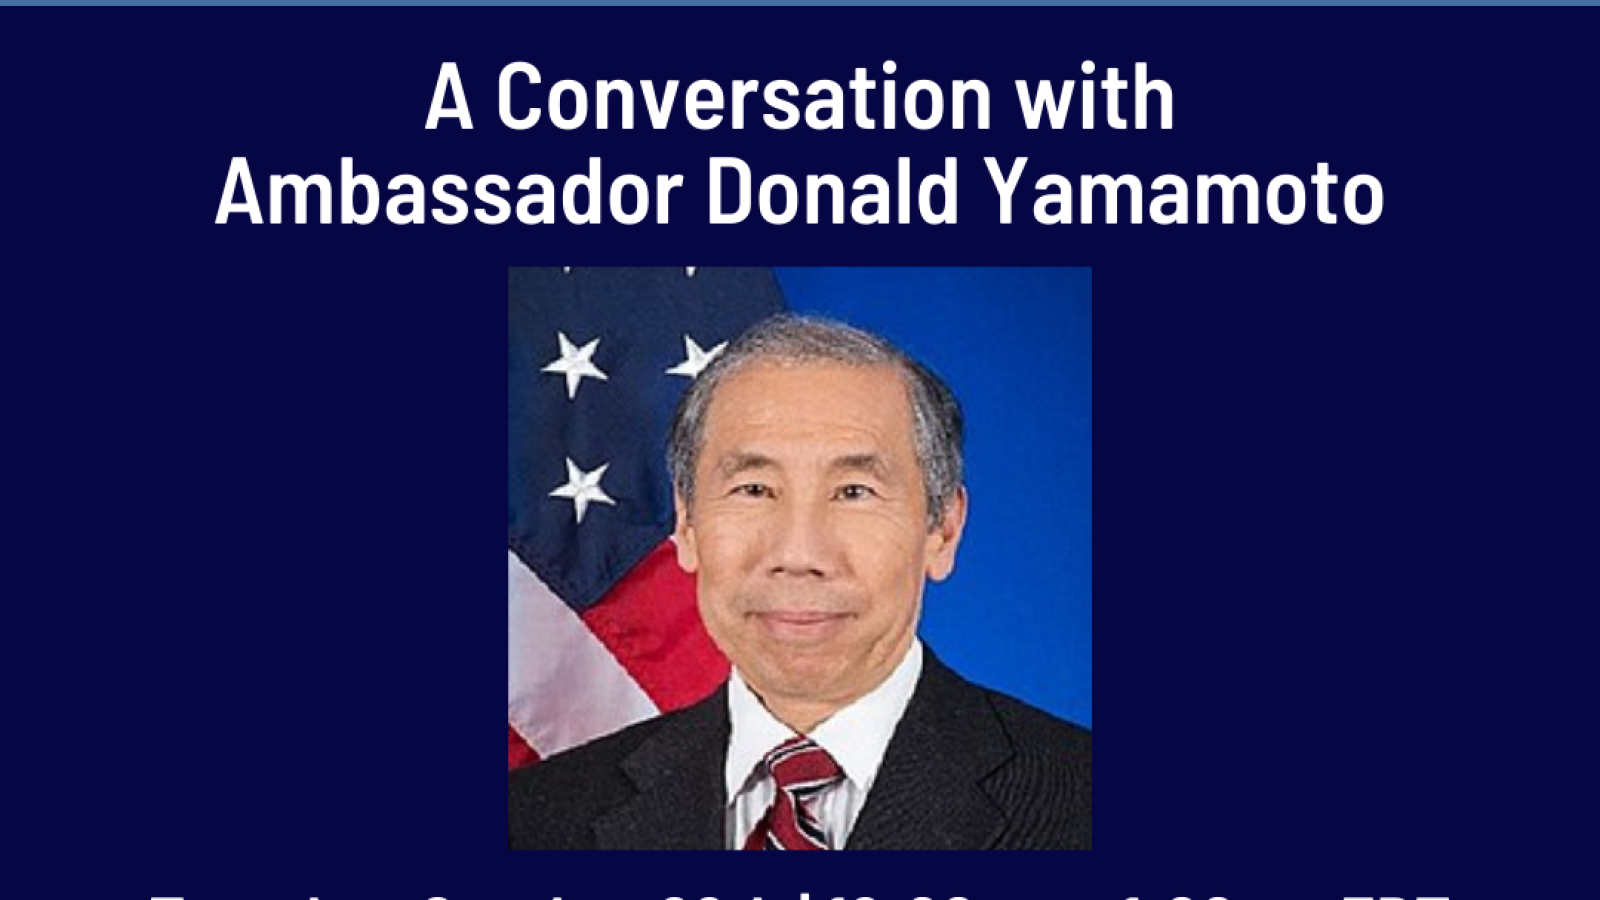 Promotion of Event with Ambassador Yamamoto happening October 26th at 12:00pm